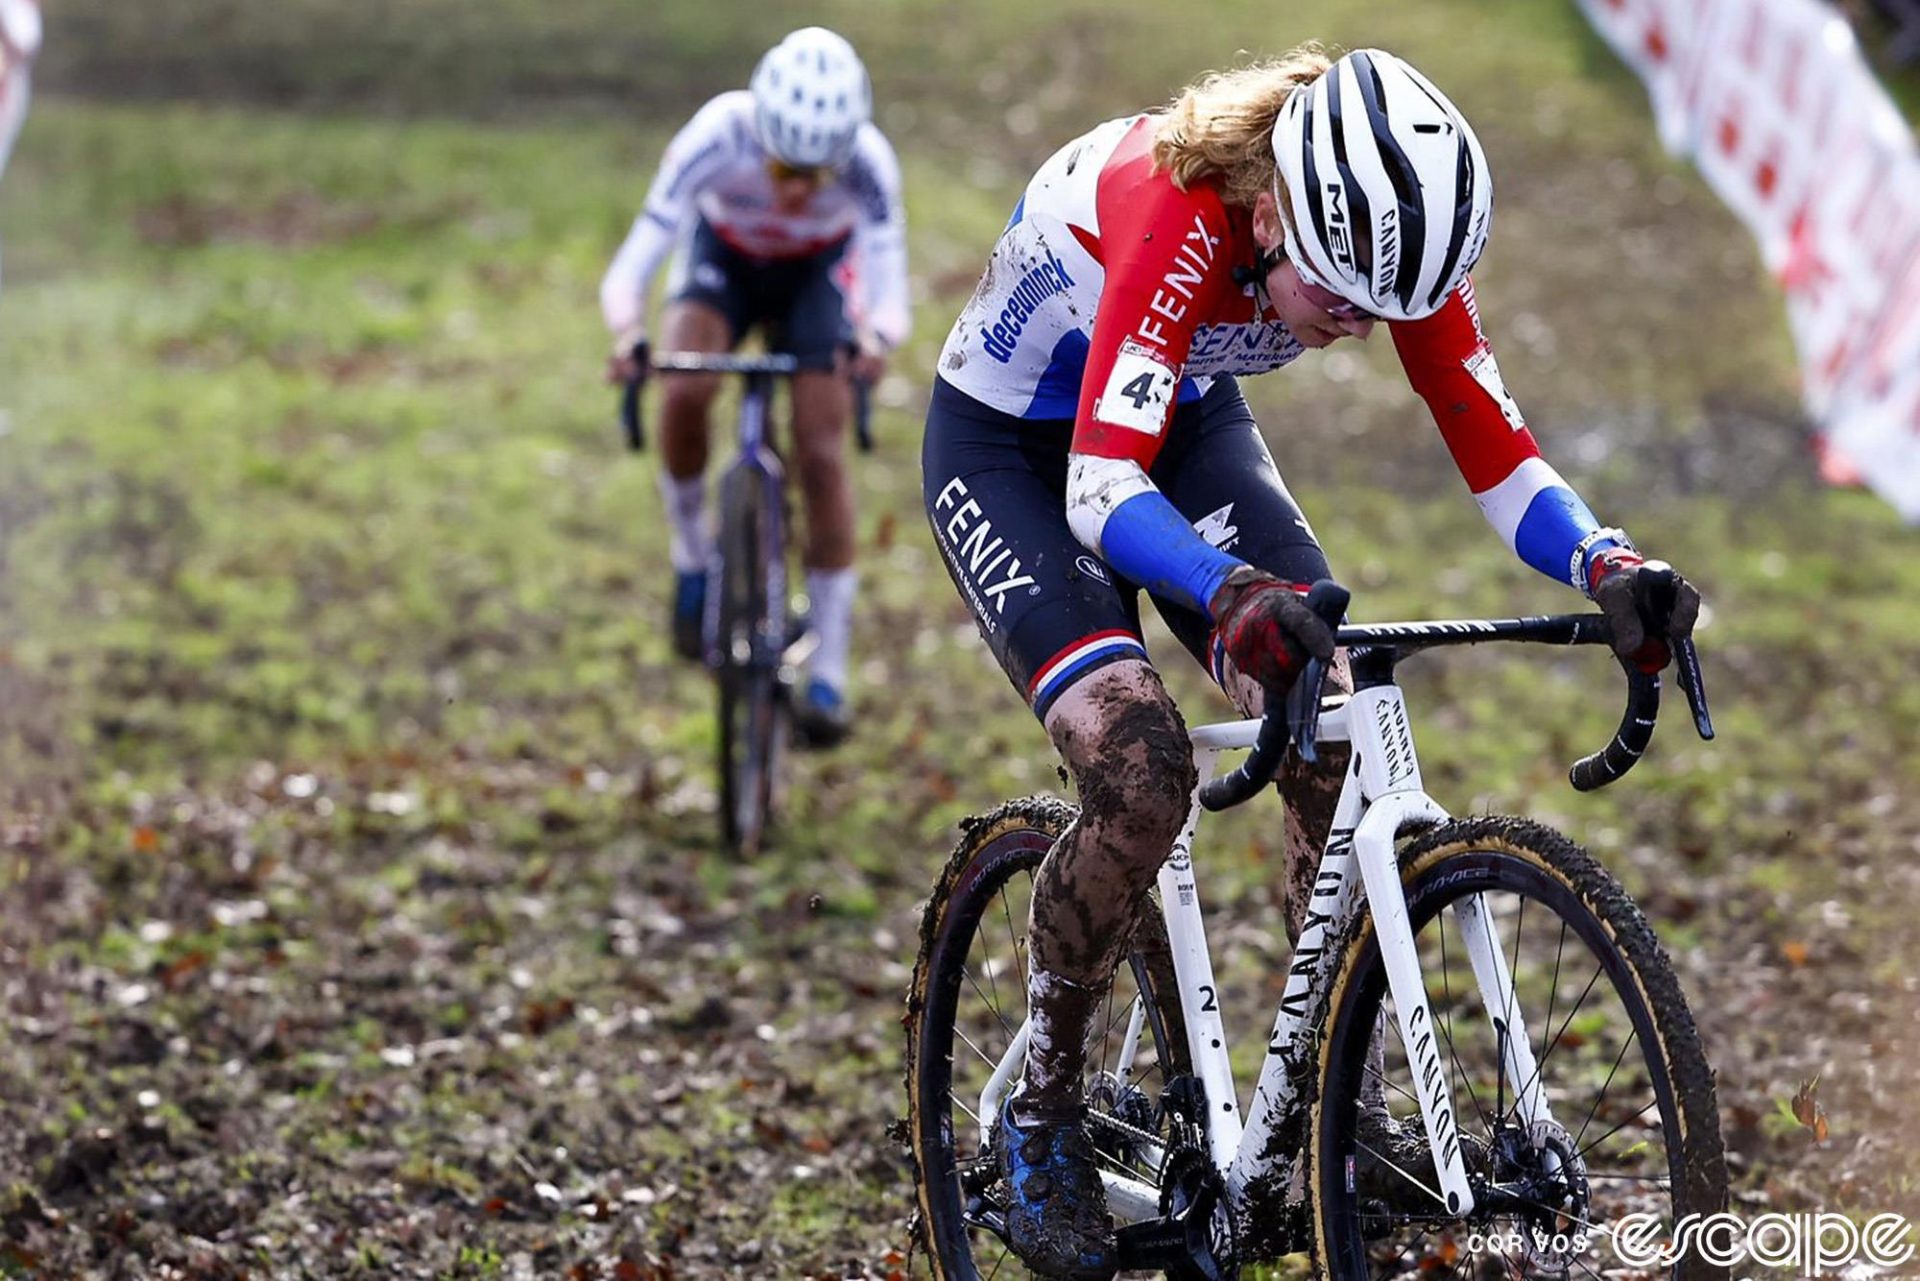 Puck Pieterse leads Ceylin del Carmen Alvarado on a long, grinding grass and mud section at Gavere.